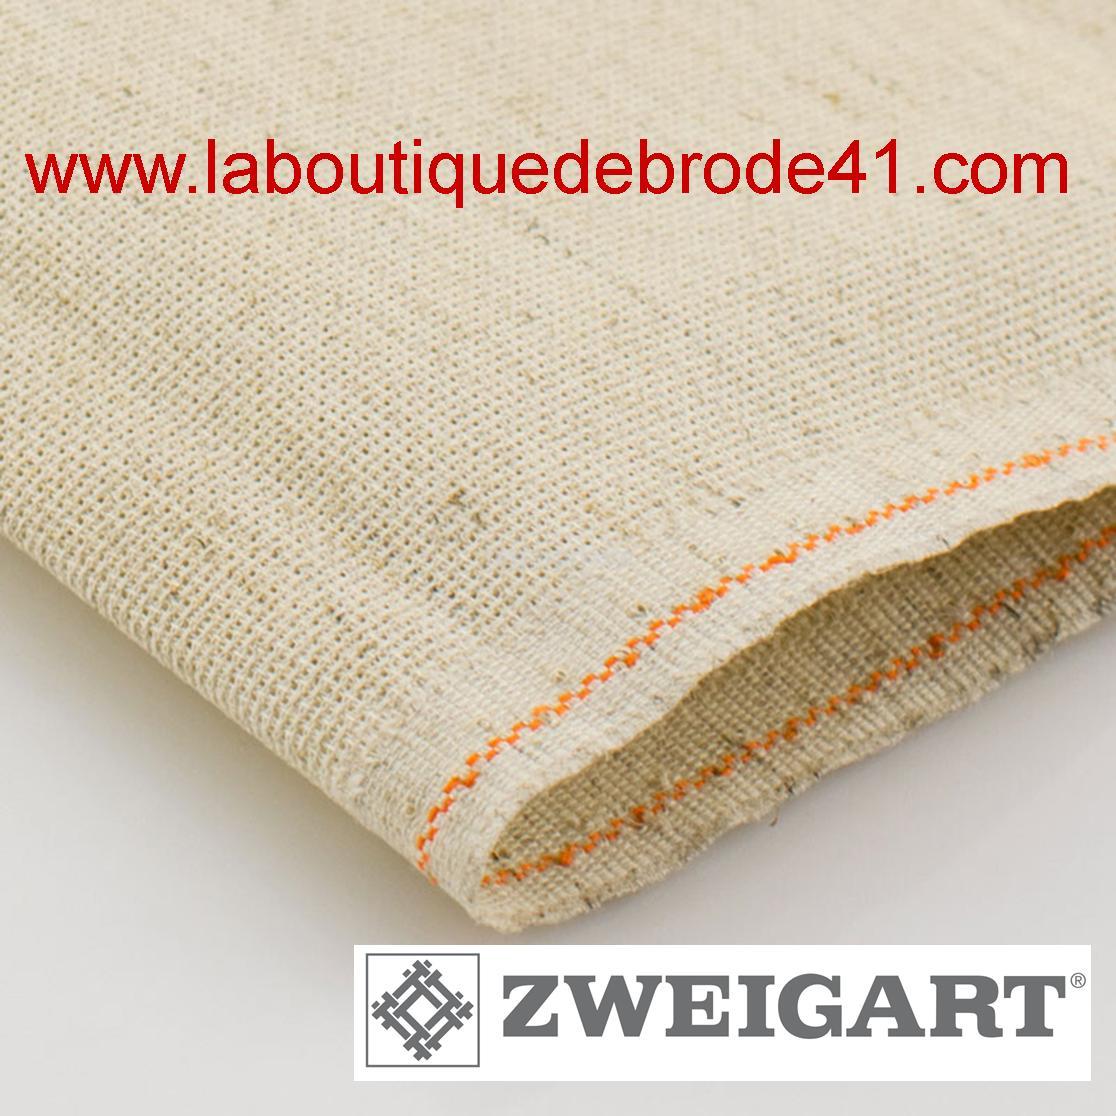 Toile a broder zweigart extra fine aida 8 pts 3427 rustico 54